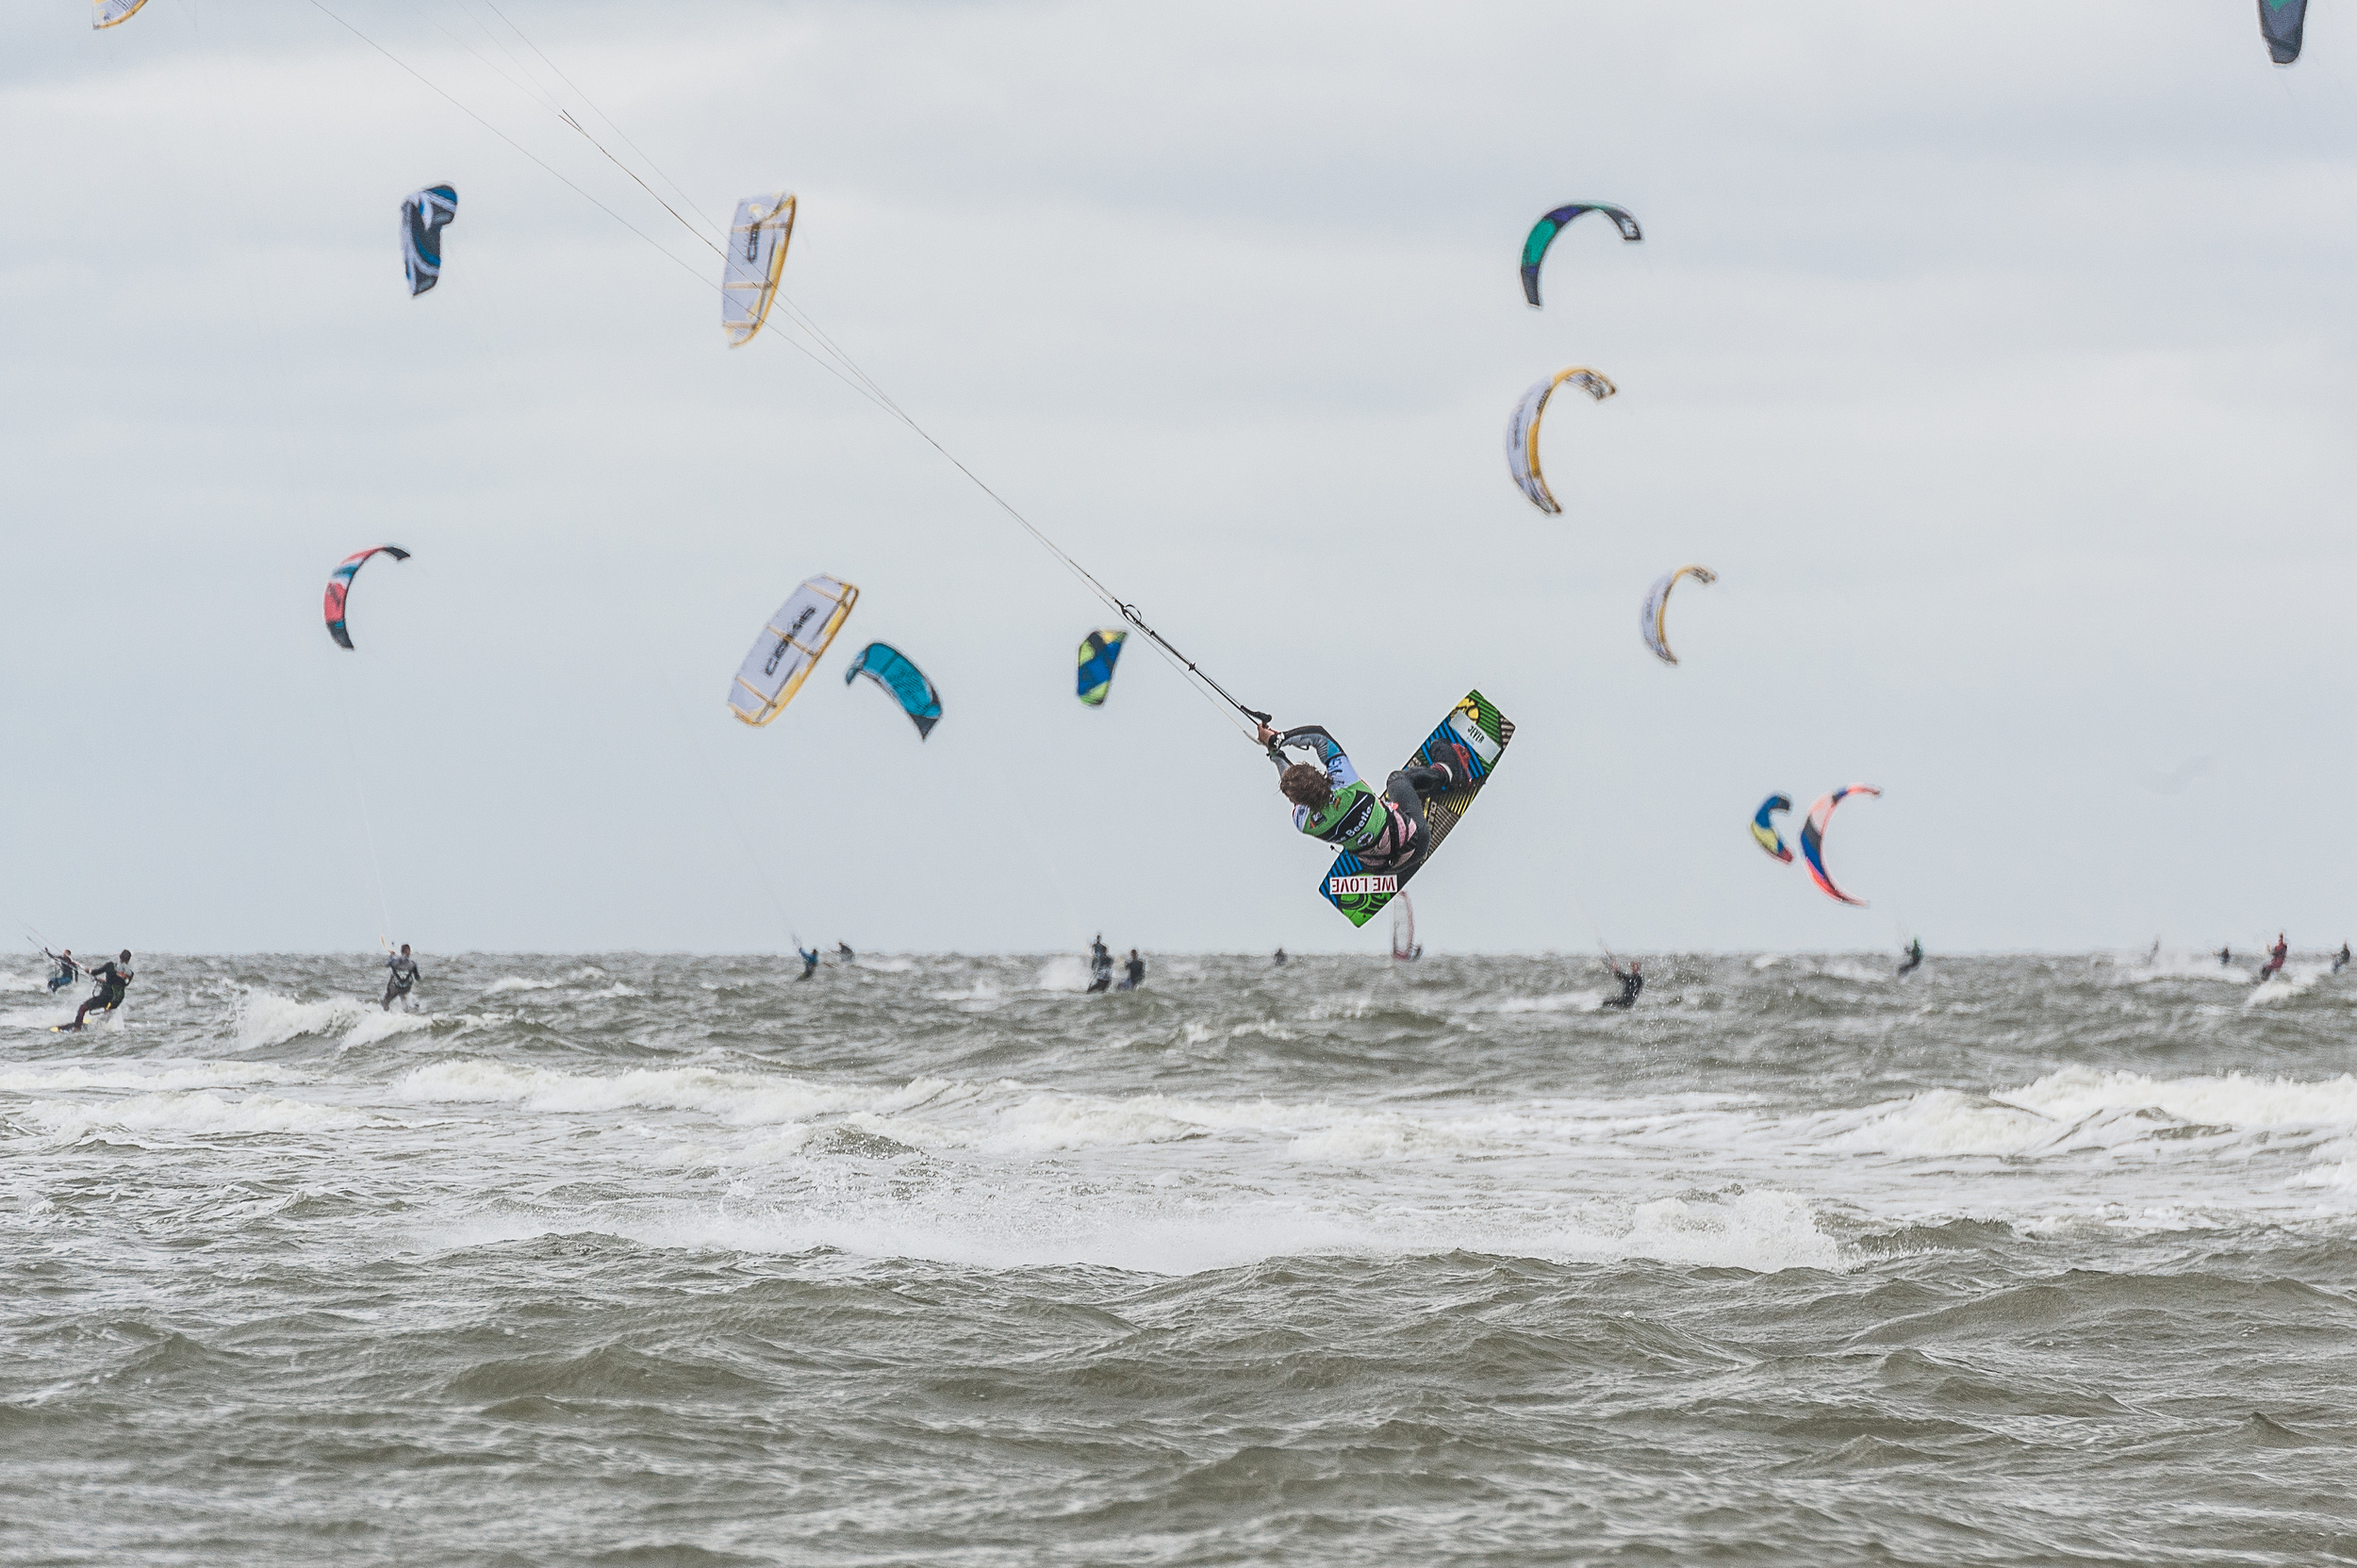 Kite Surf World Cup, St.Peter Ording, Germany